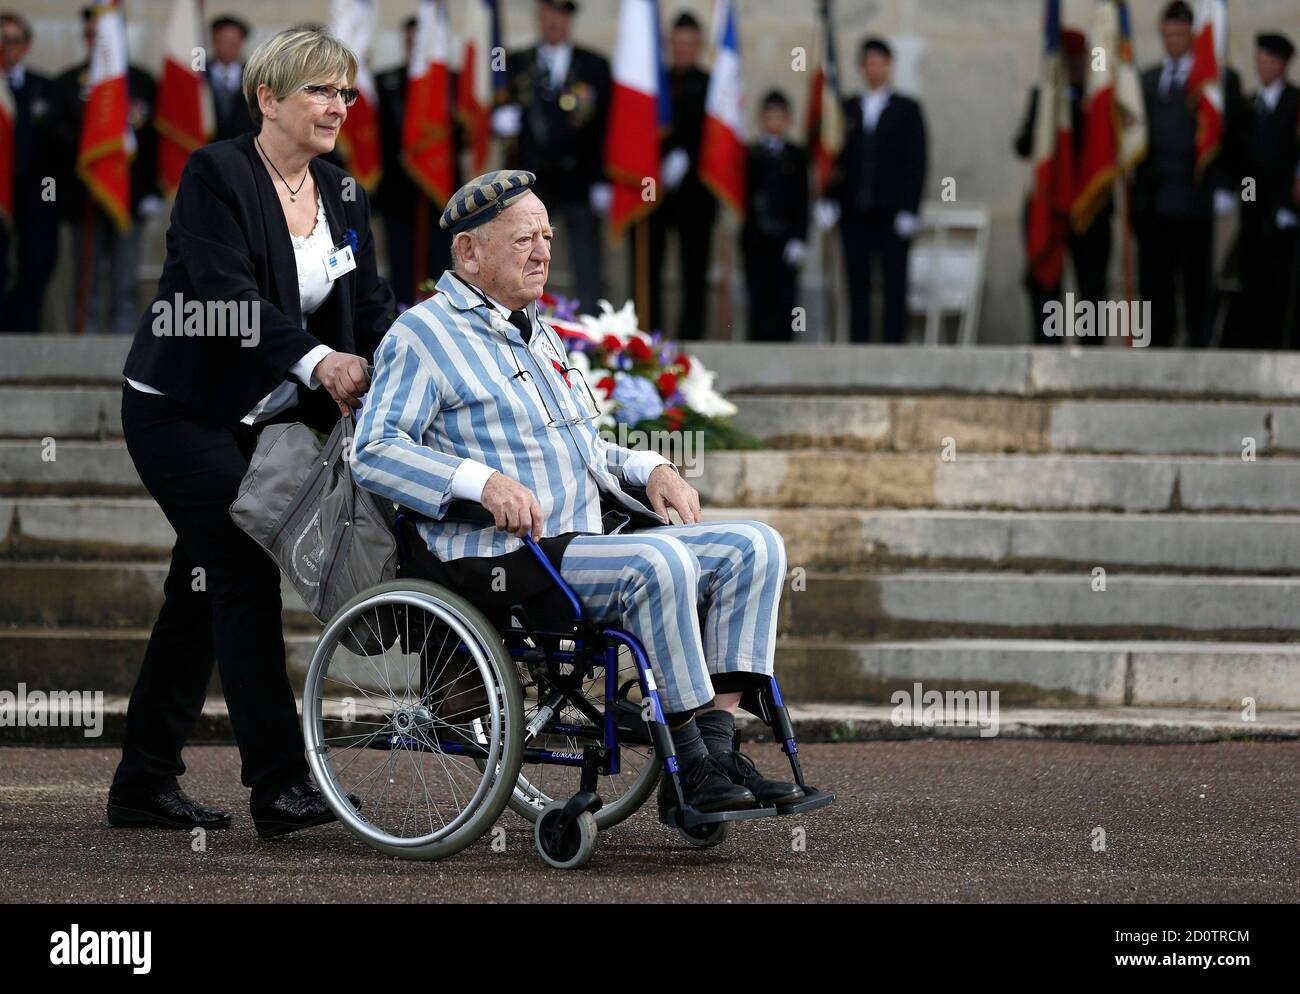 Holocaust survivor Robert Salomon is pushed in a wheelchair at the former  World War II concentration camp of Natzweiler-Struthof during ceremonies to  mark the French National Deportation Day, in Natzweiler, eastern France,